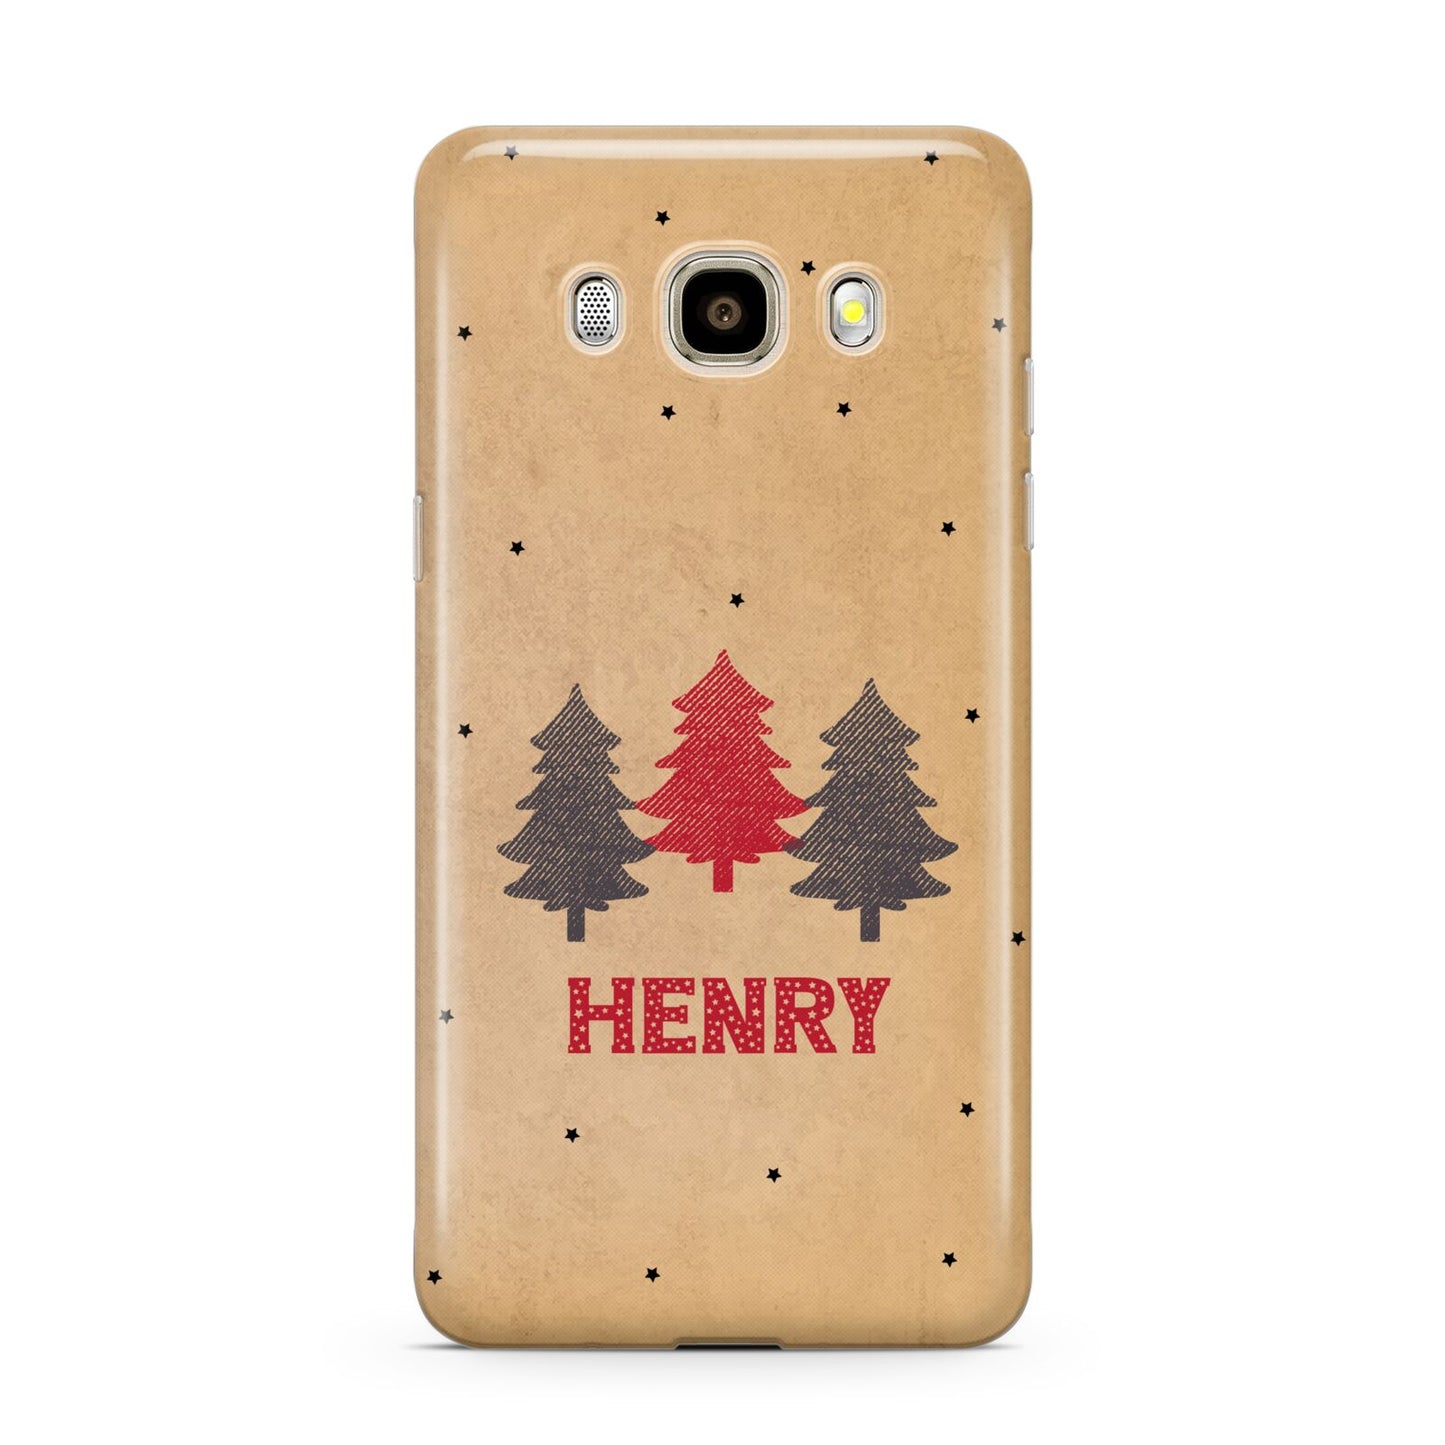 Personalised Christmas Tree Samsung Galaxy J7 2016 Case on gold phone